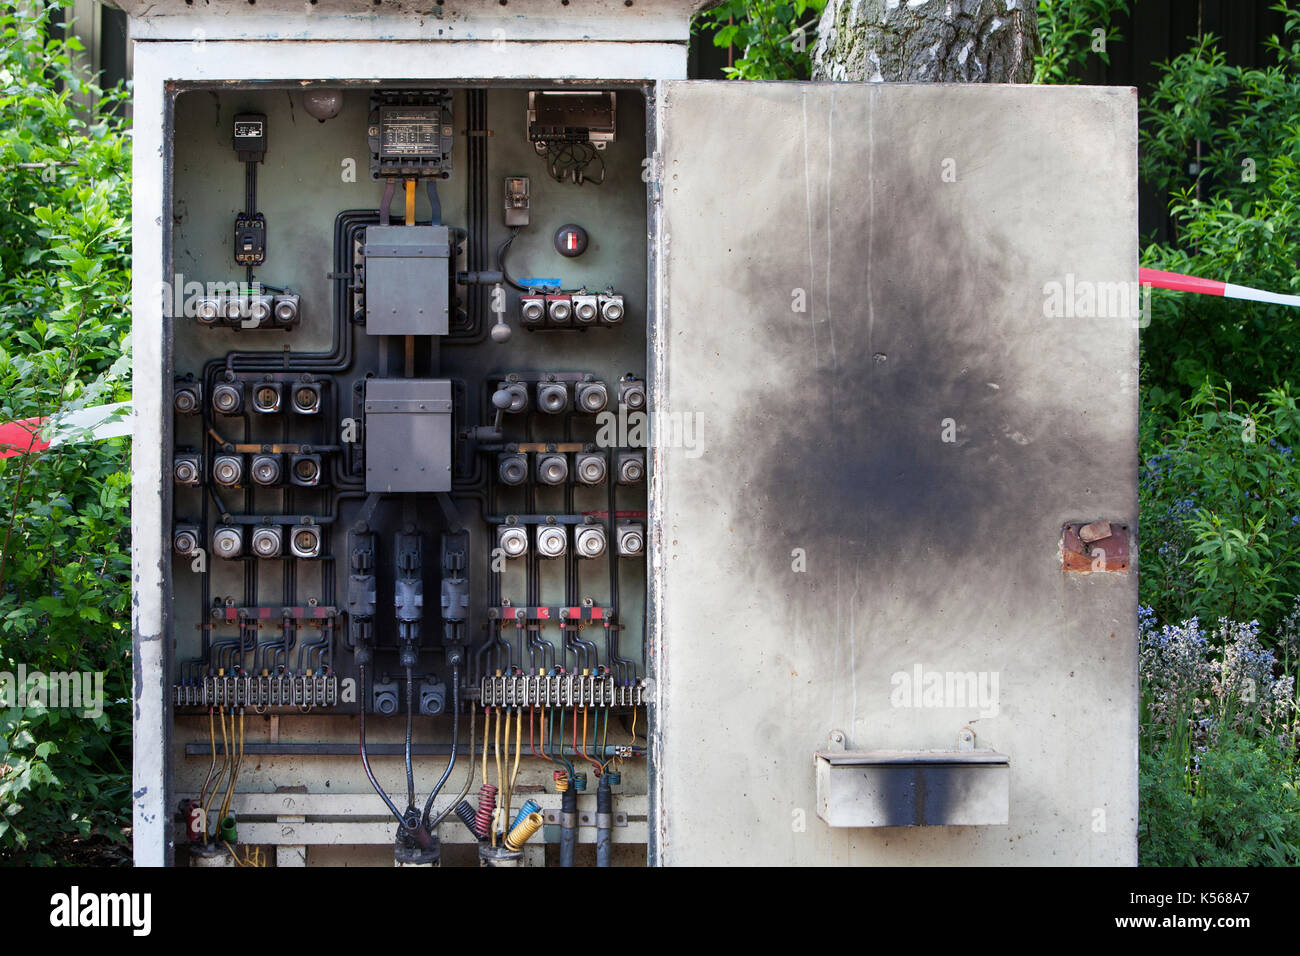 Blackened circuit board of an electrical cabinet Stock Photo